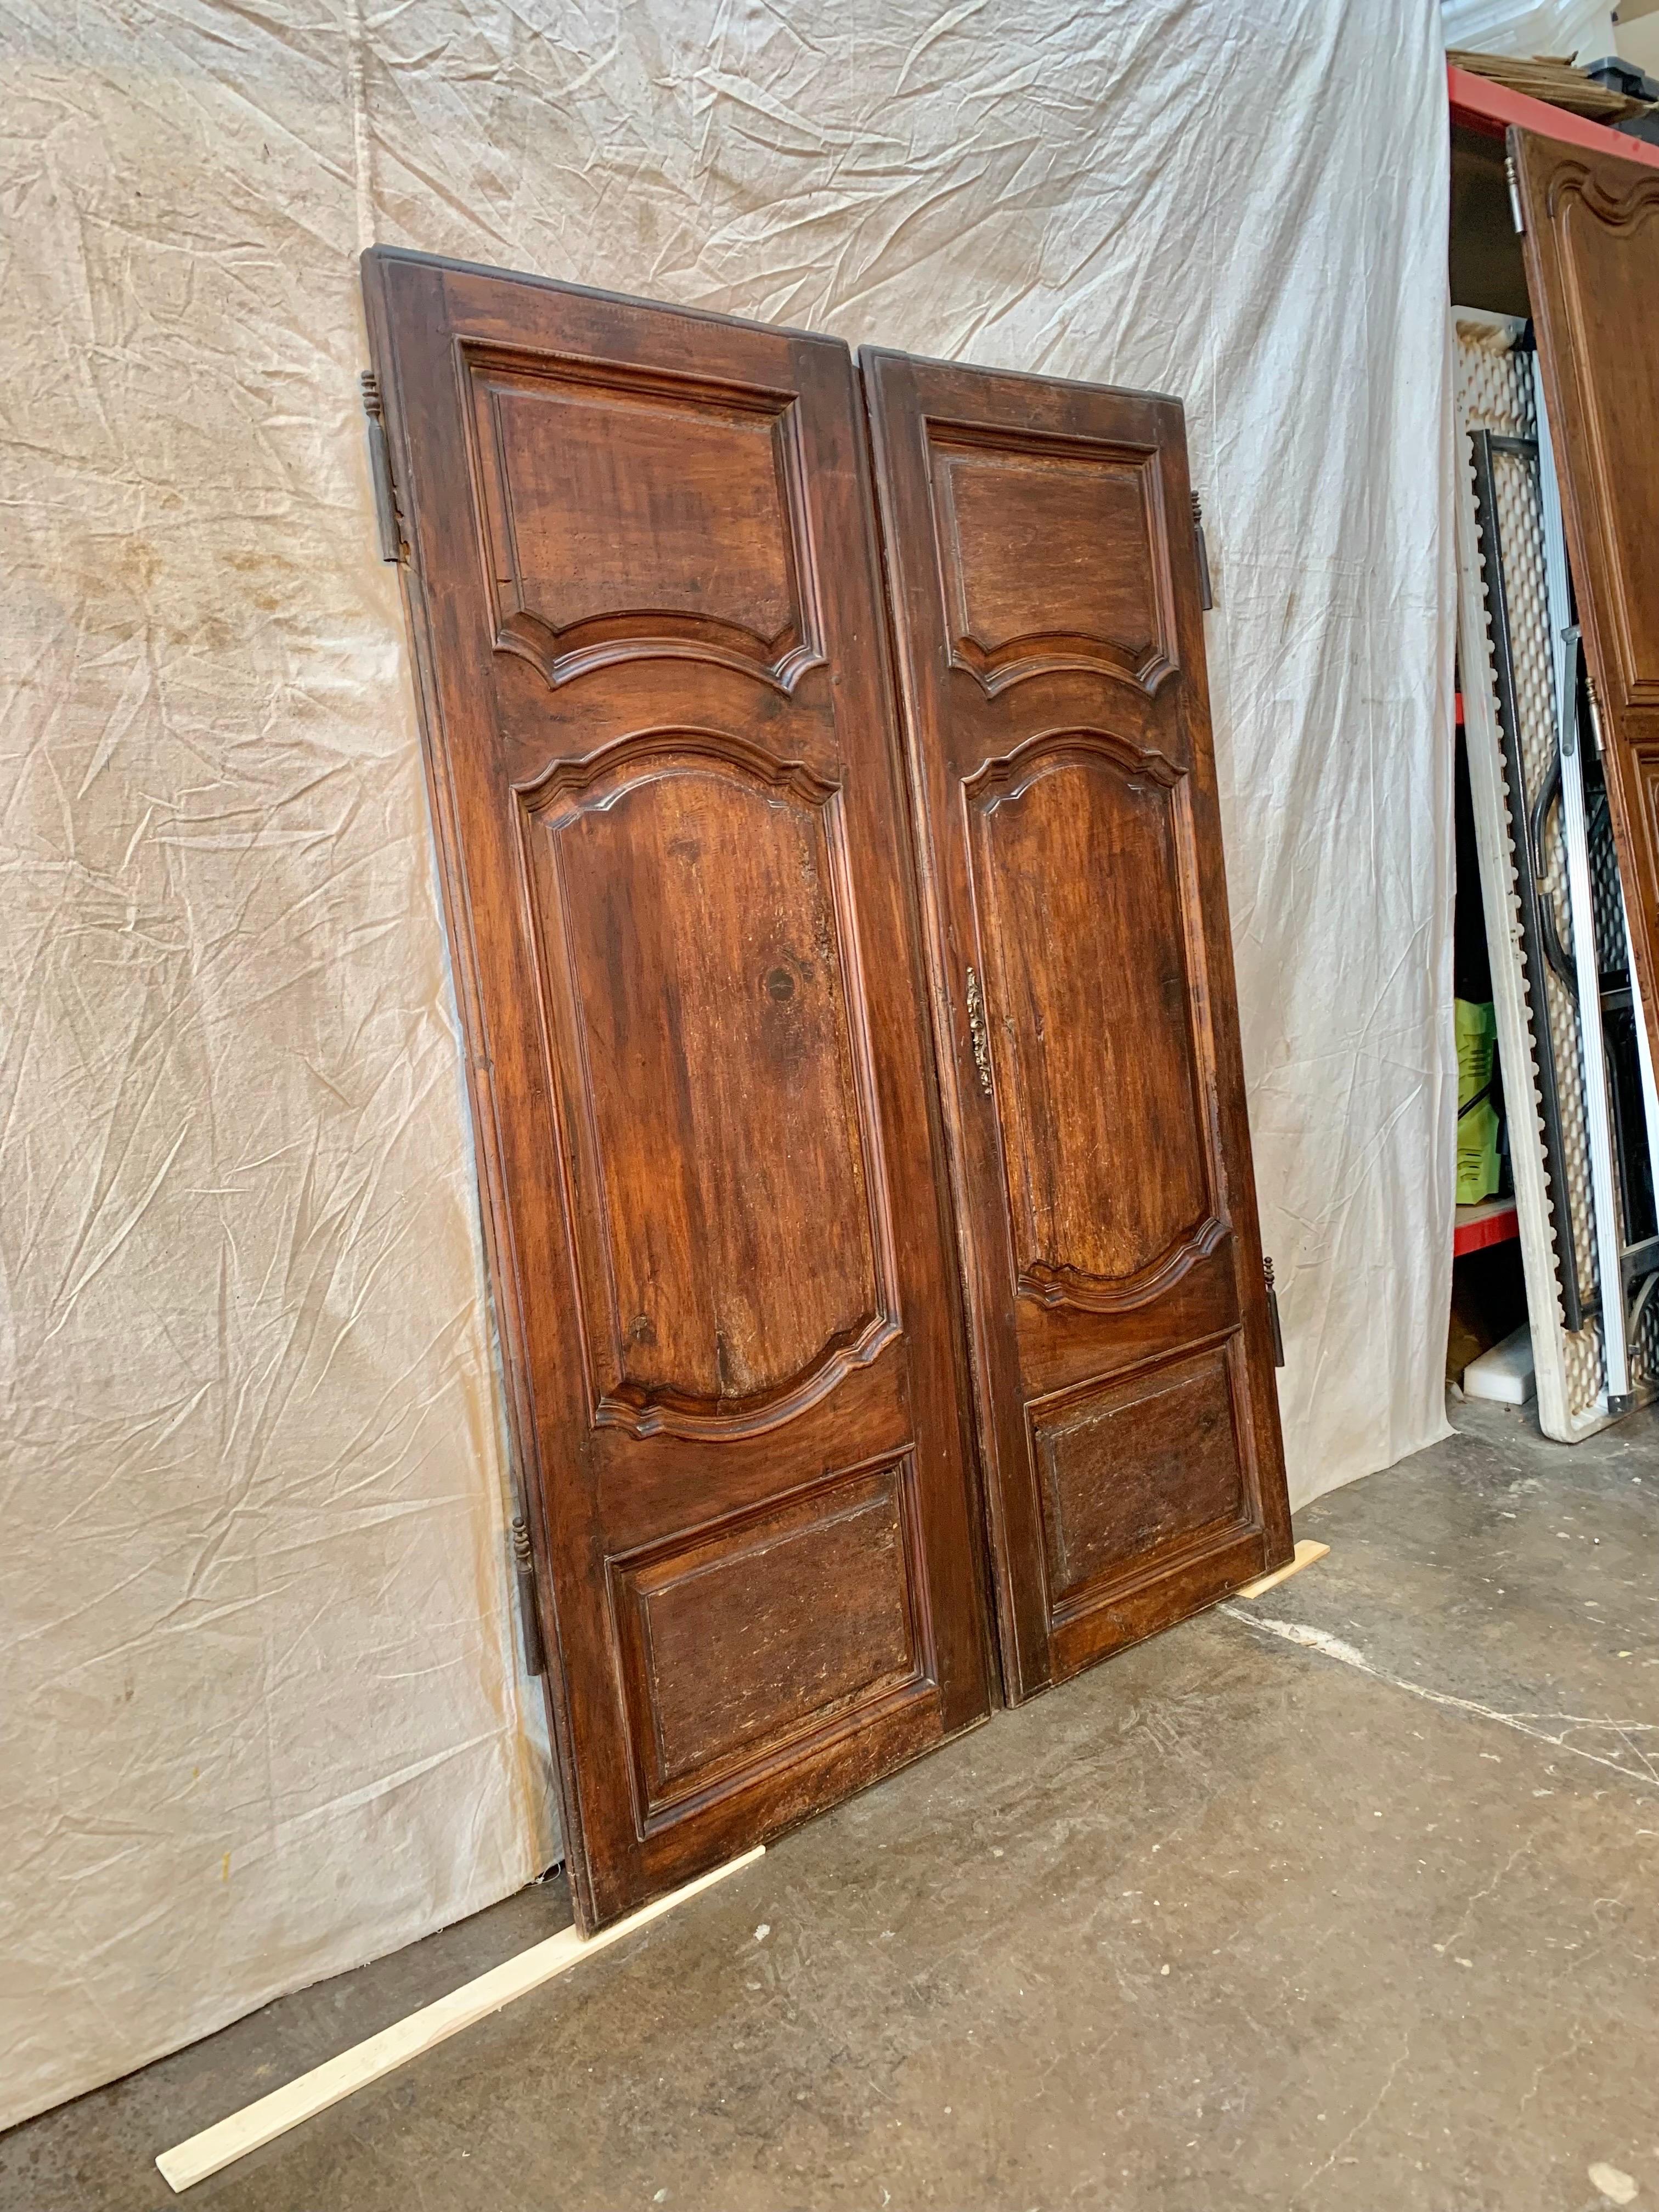 Found in the South of France, this pair of 19th Century French Armoire Doors once graced a beautiful armoire that was made in the 1800's. Hand crafted from walnut, the doors display three panels, the original escutcheon plate and partial hinges.